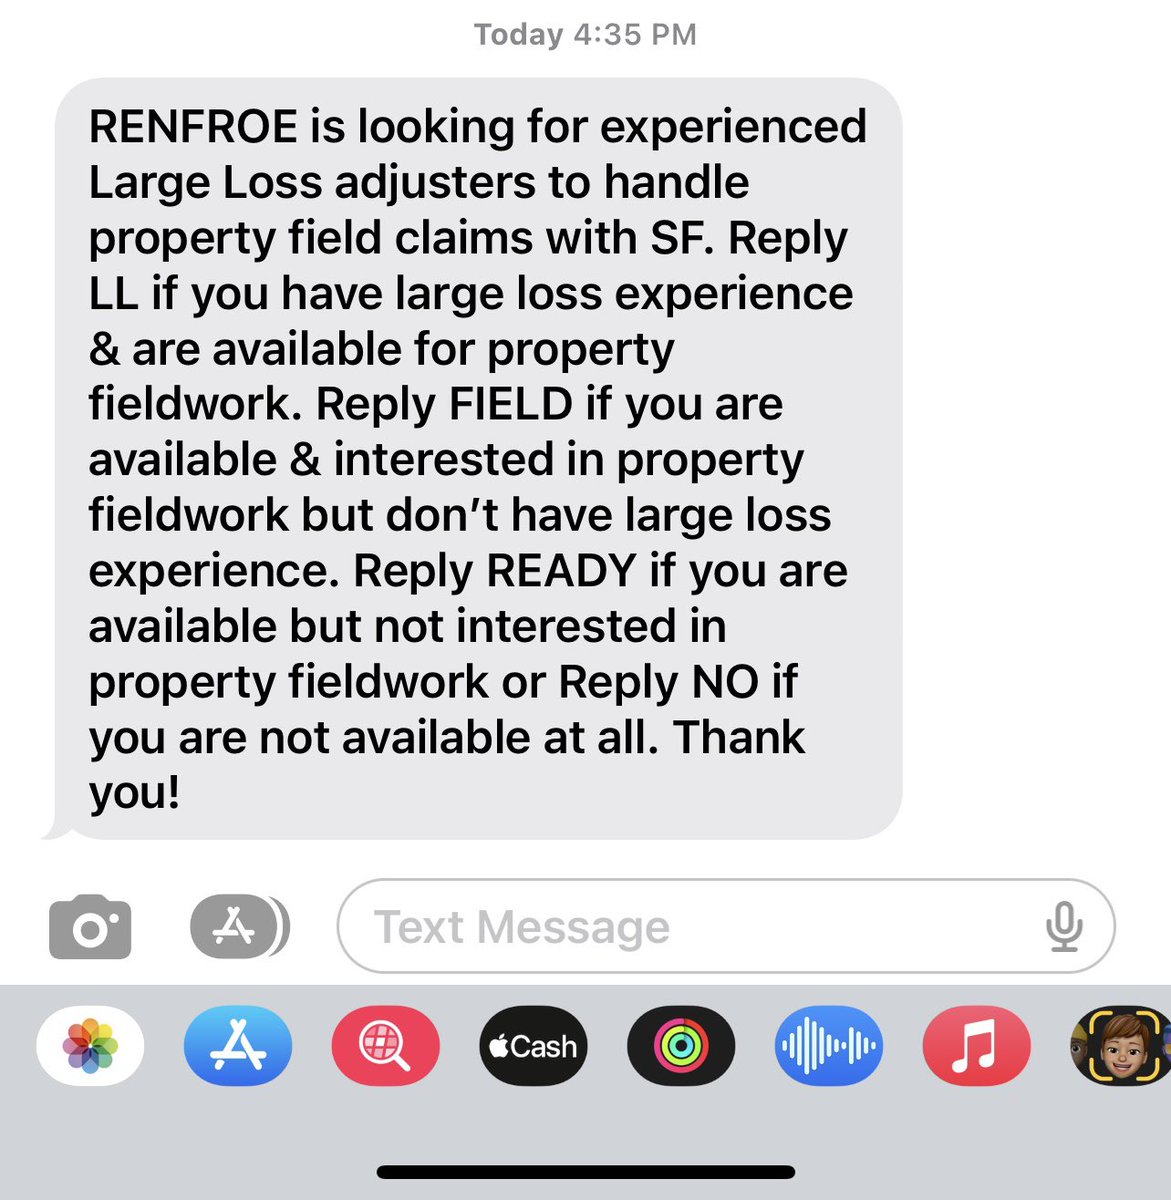 Plenty of work in catastrophic times. This text just came through. Call Renfroe and get on their roster if you are not already. #claimadjuster #insuranceadjuster #adjusterlife #independentadjuster #insuranceclaimadjuster #tornado